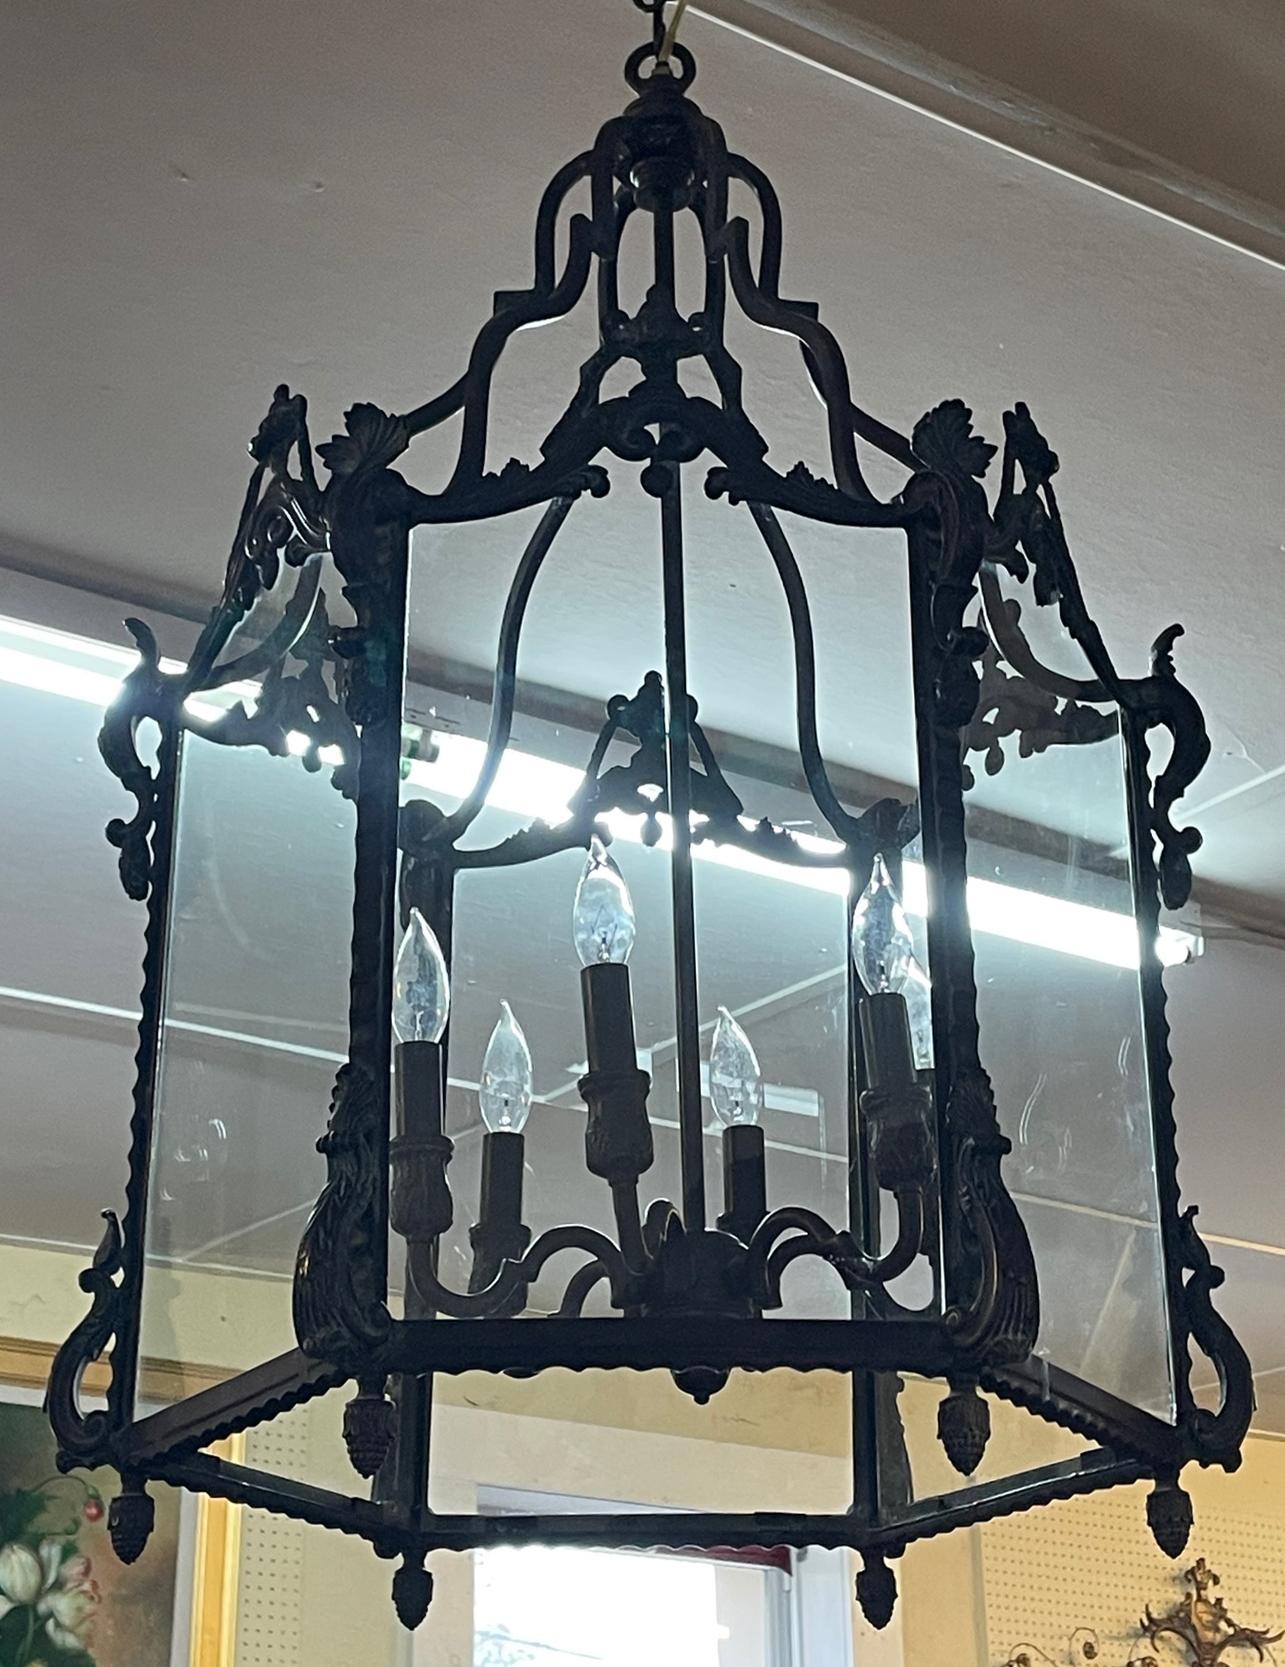 High Quality Bronze Patina 6 Light Chandelier Lantern 38 X 24 X 24 In Good Condition For Sale In Long Branch, NJ